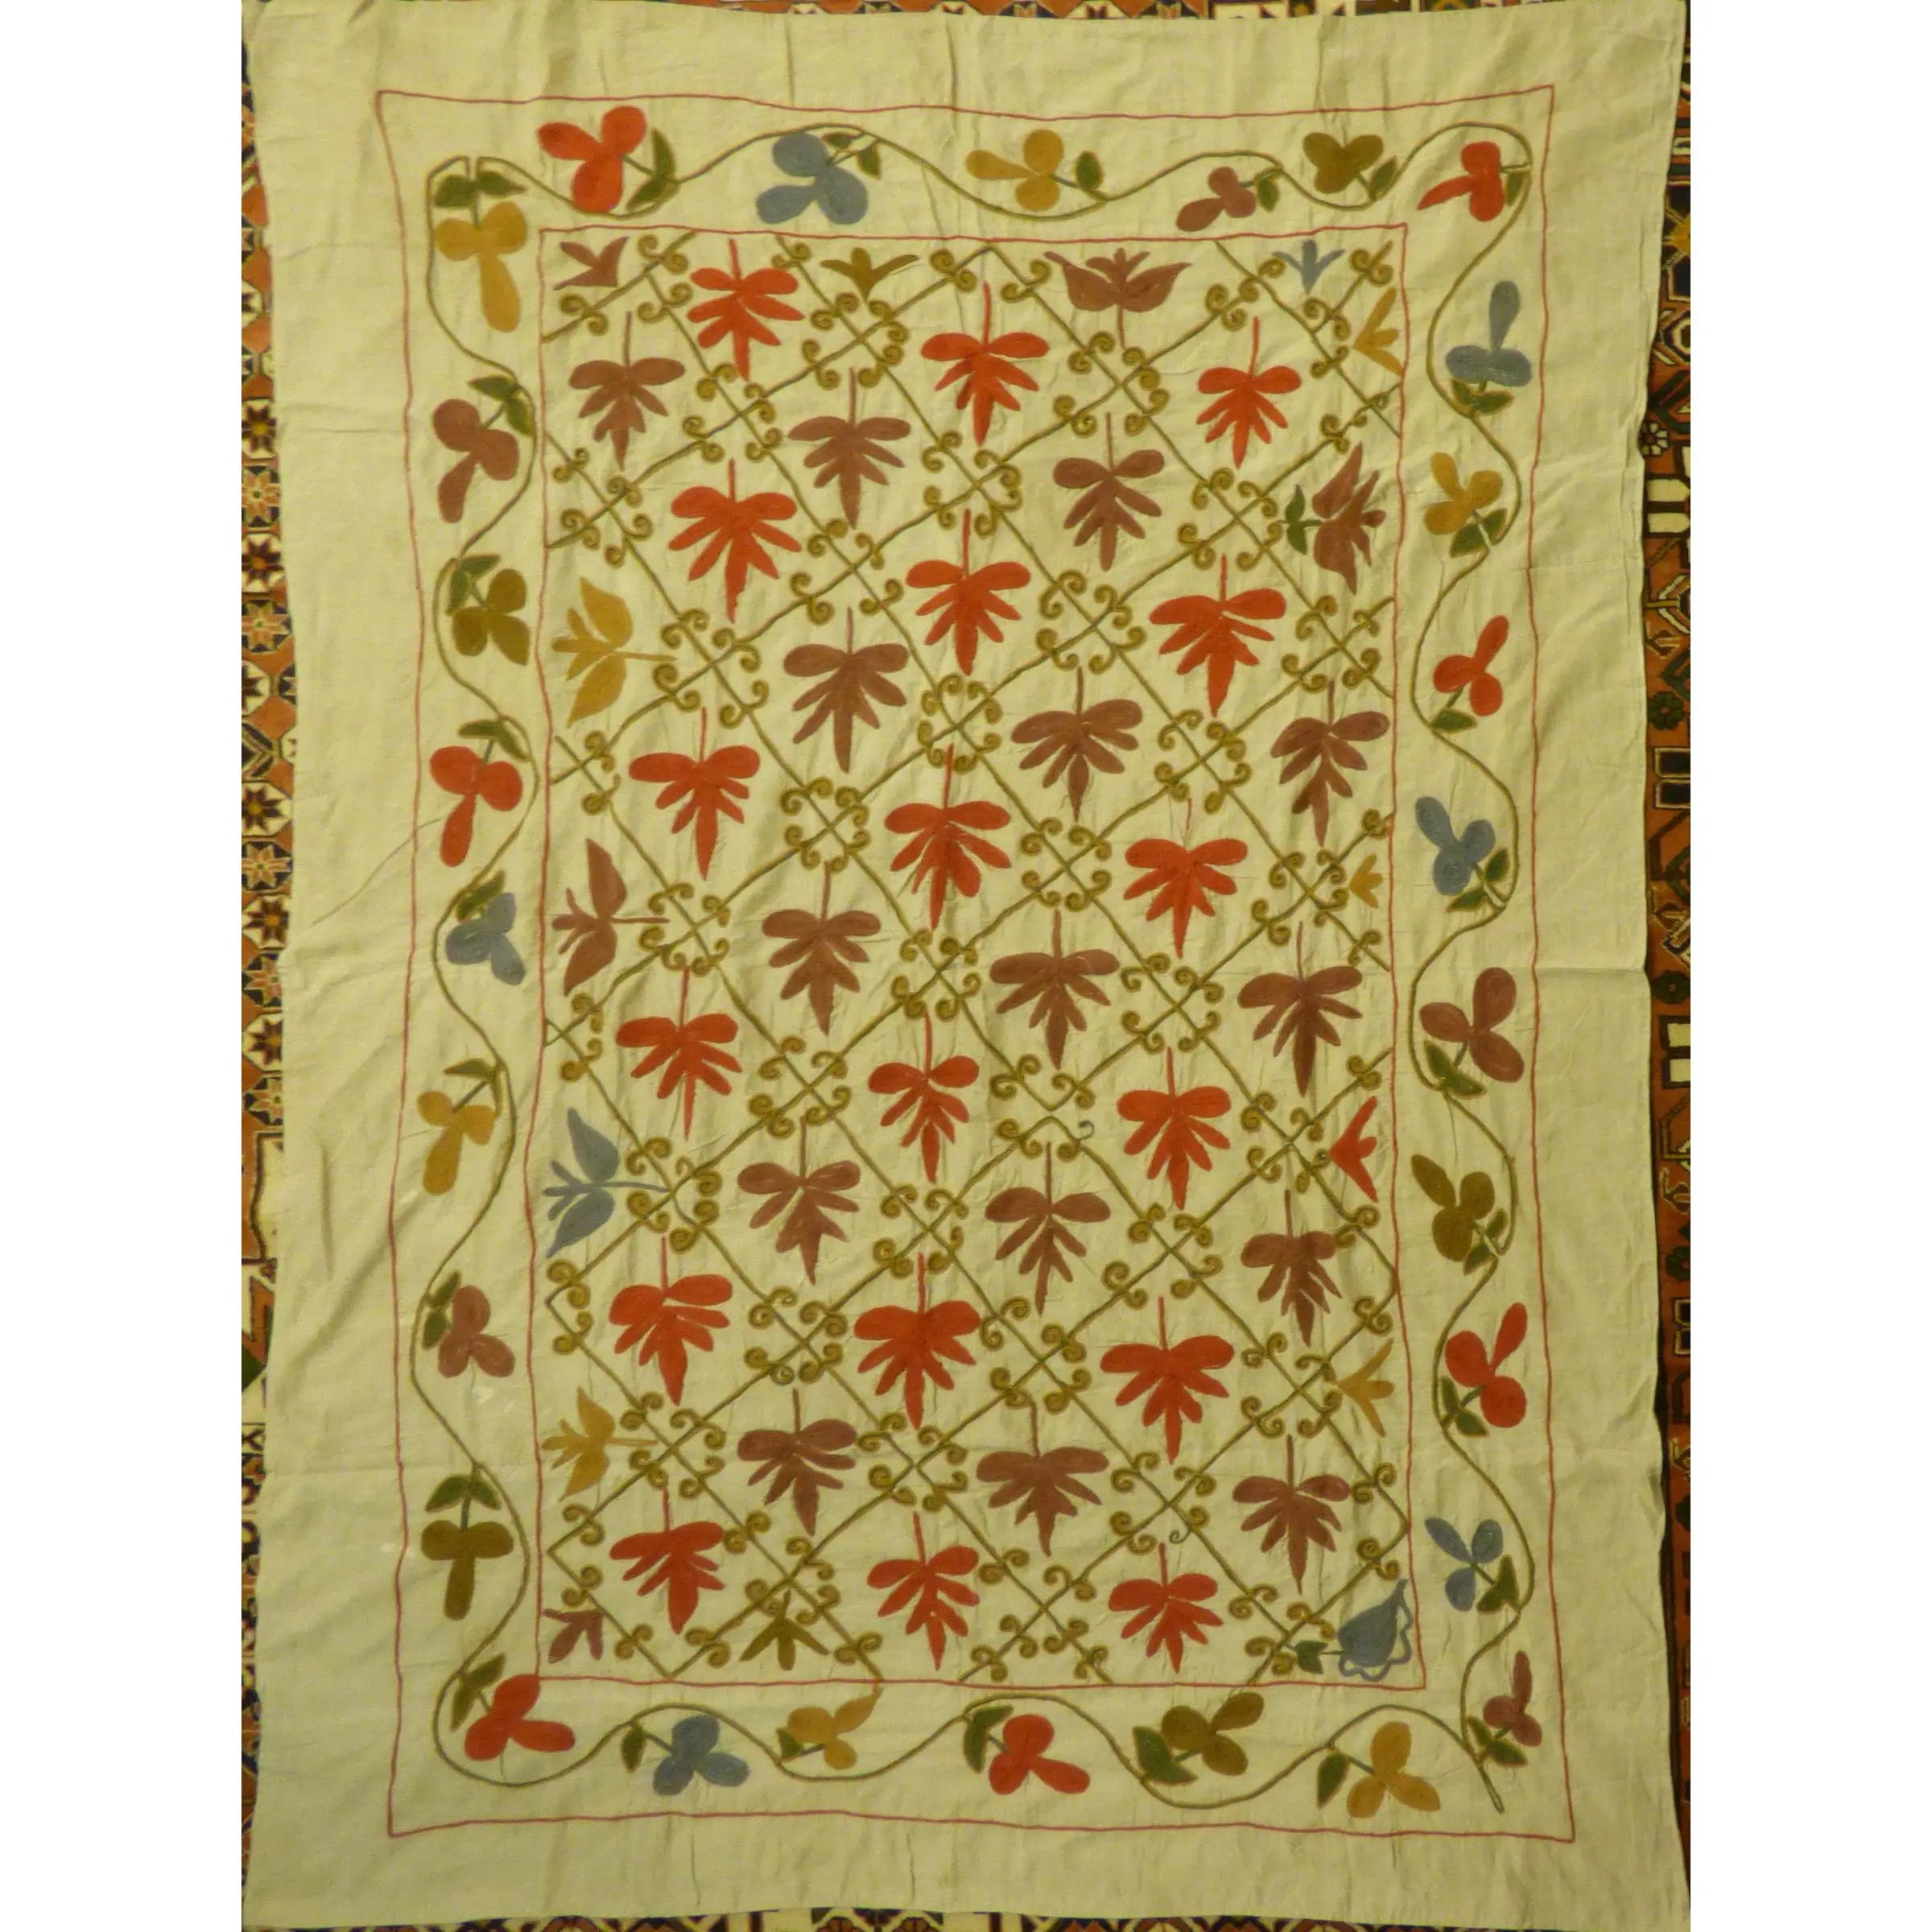 Fine Art Handmade Afghanistan Cotton Ready To Hang For Home Wall Art Decoration   72"  X  51" Panwd0004